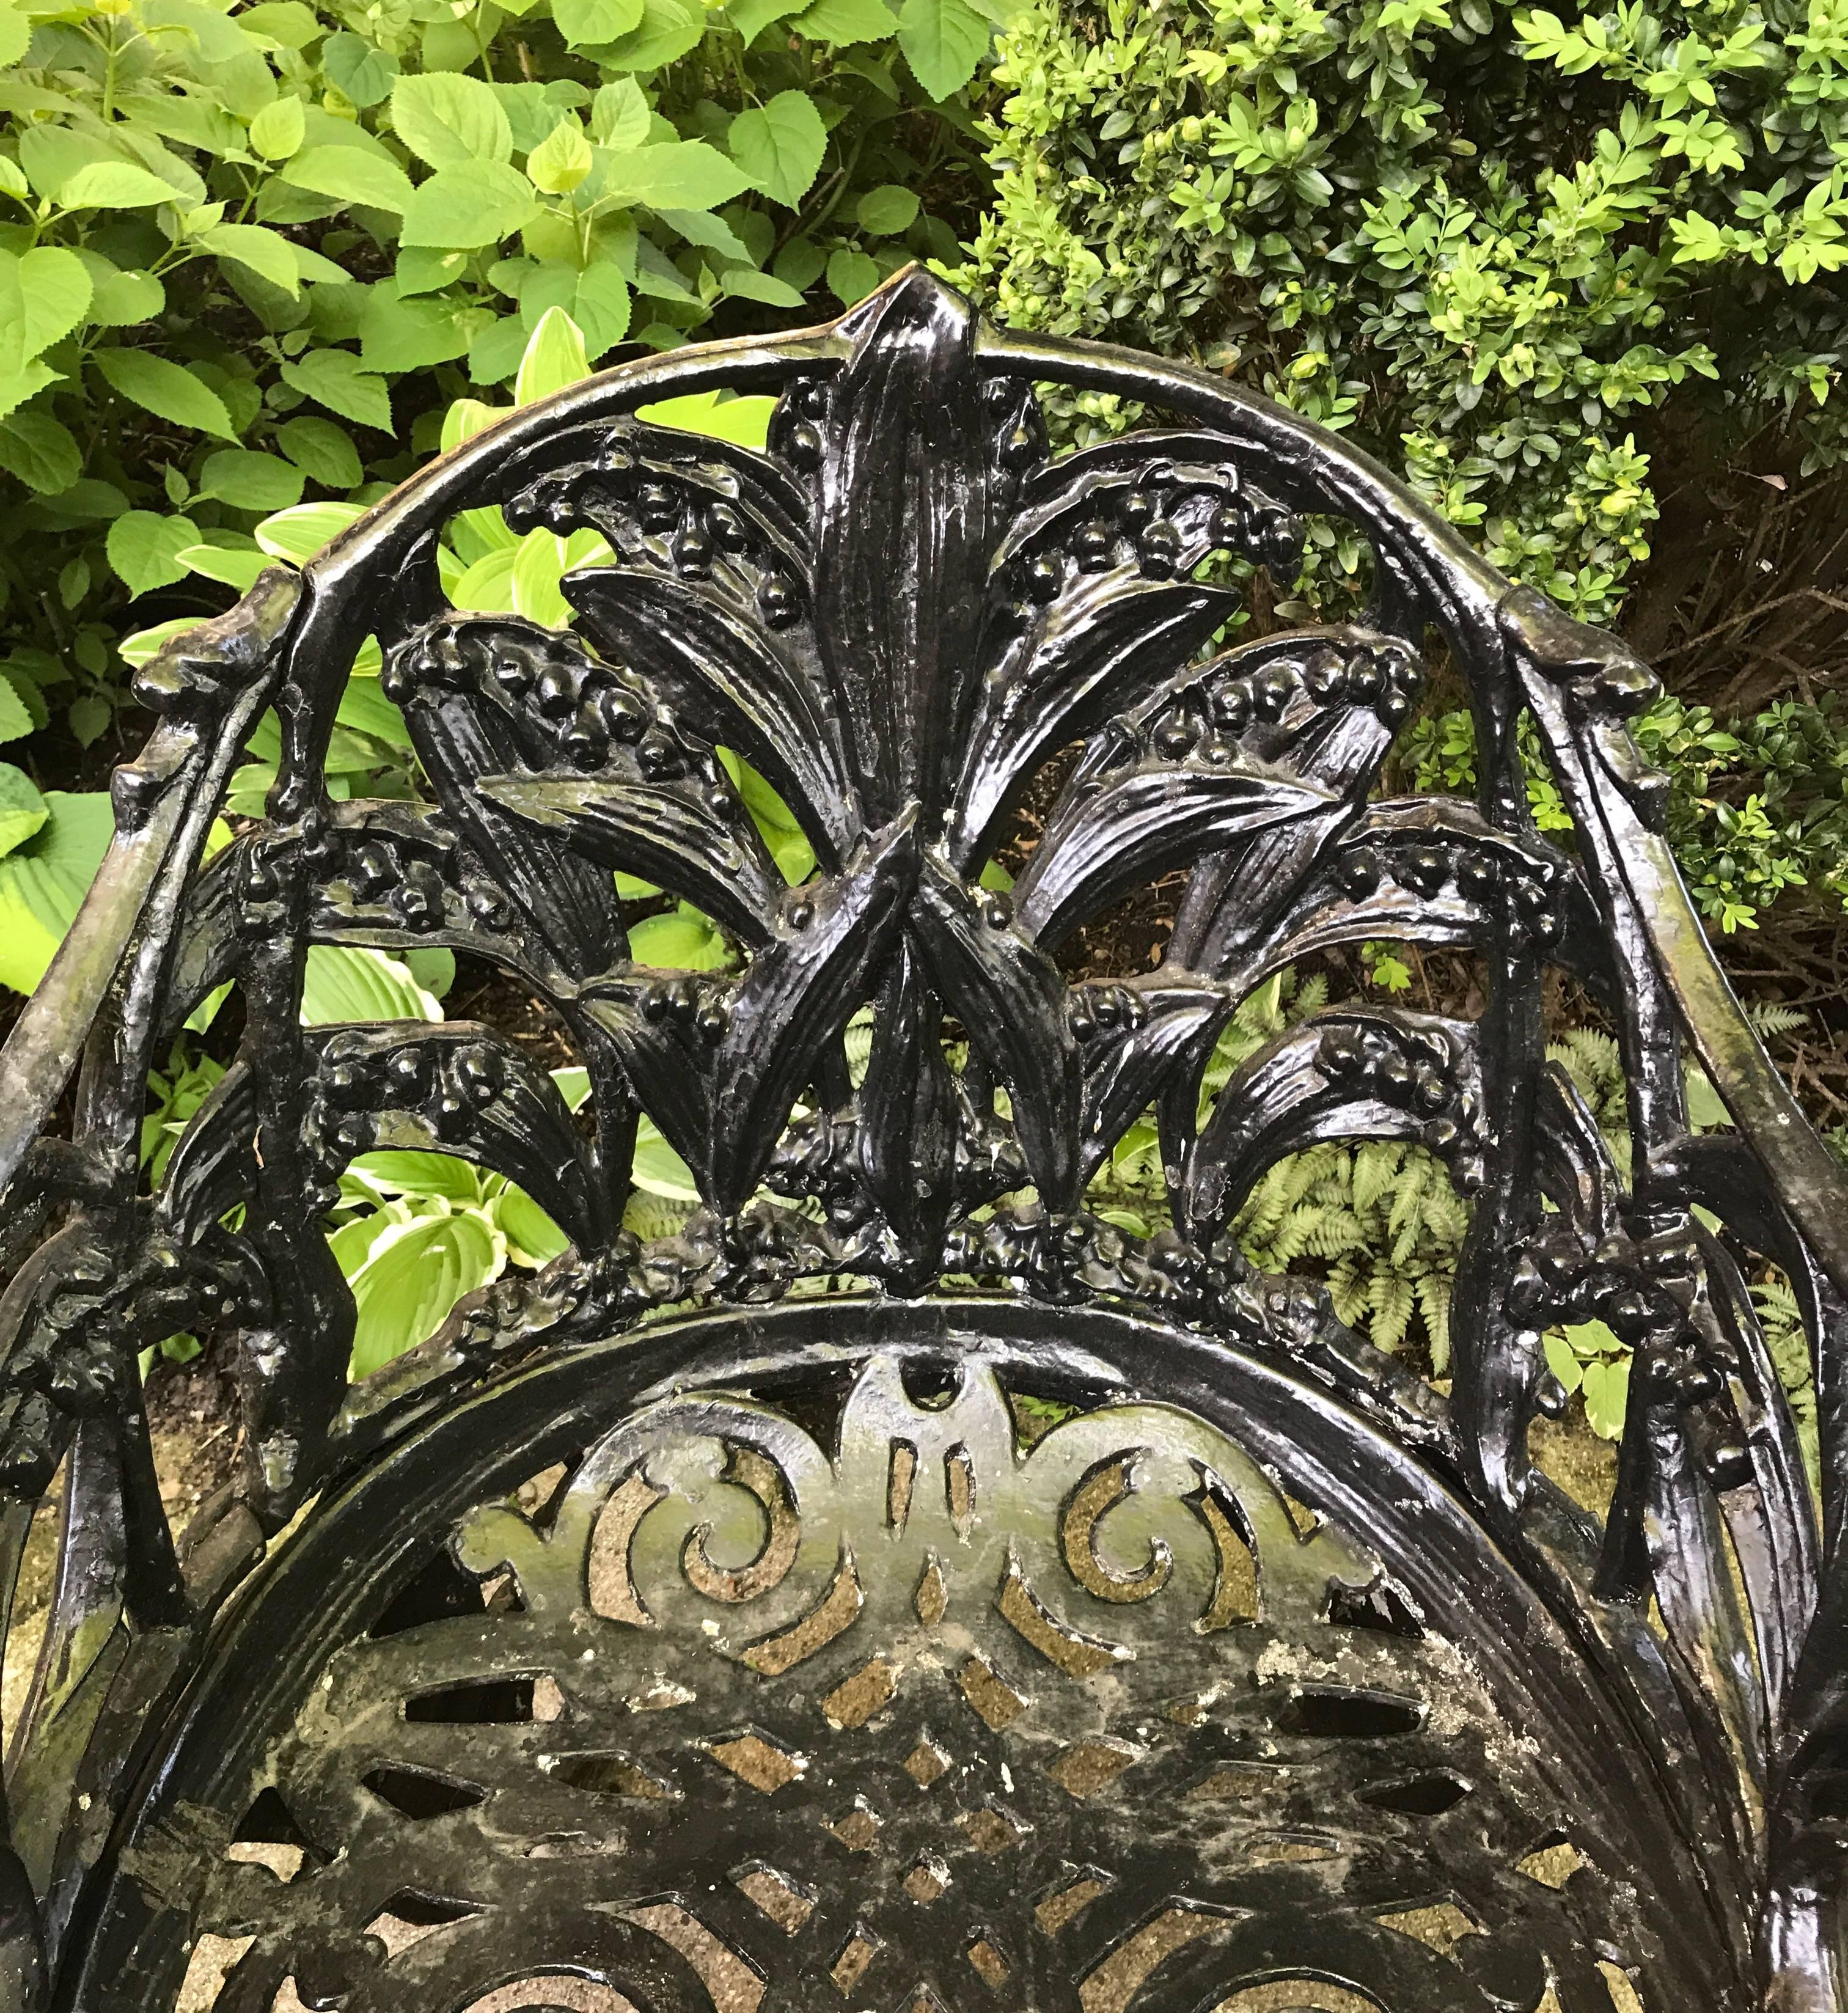 A cast aluminum Lilly of the Valley Garden chair.
Highly realistic details all over the chair.
Fantastic garden ornament.